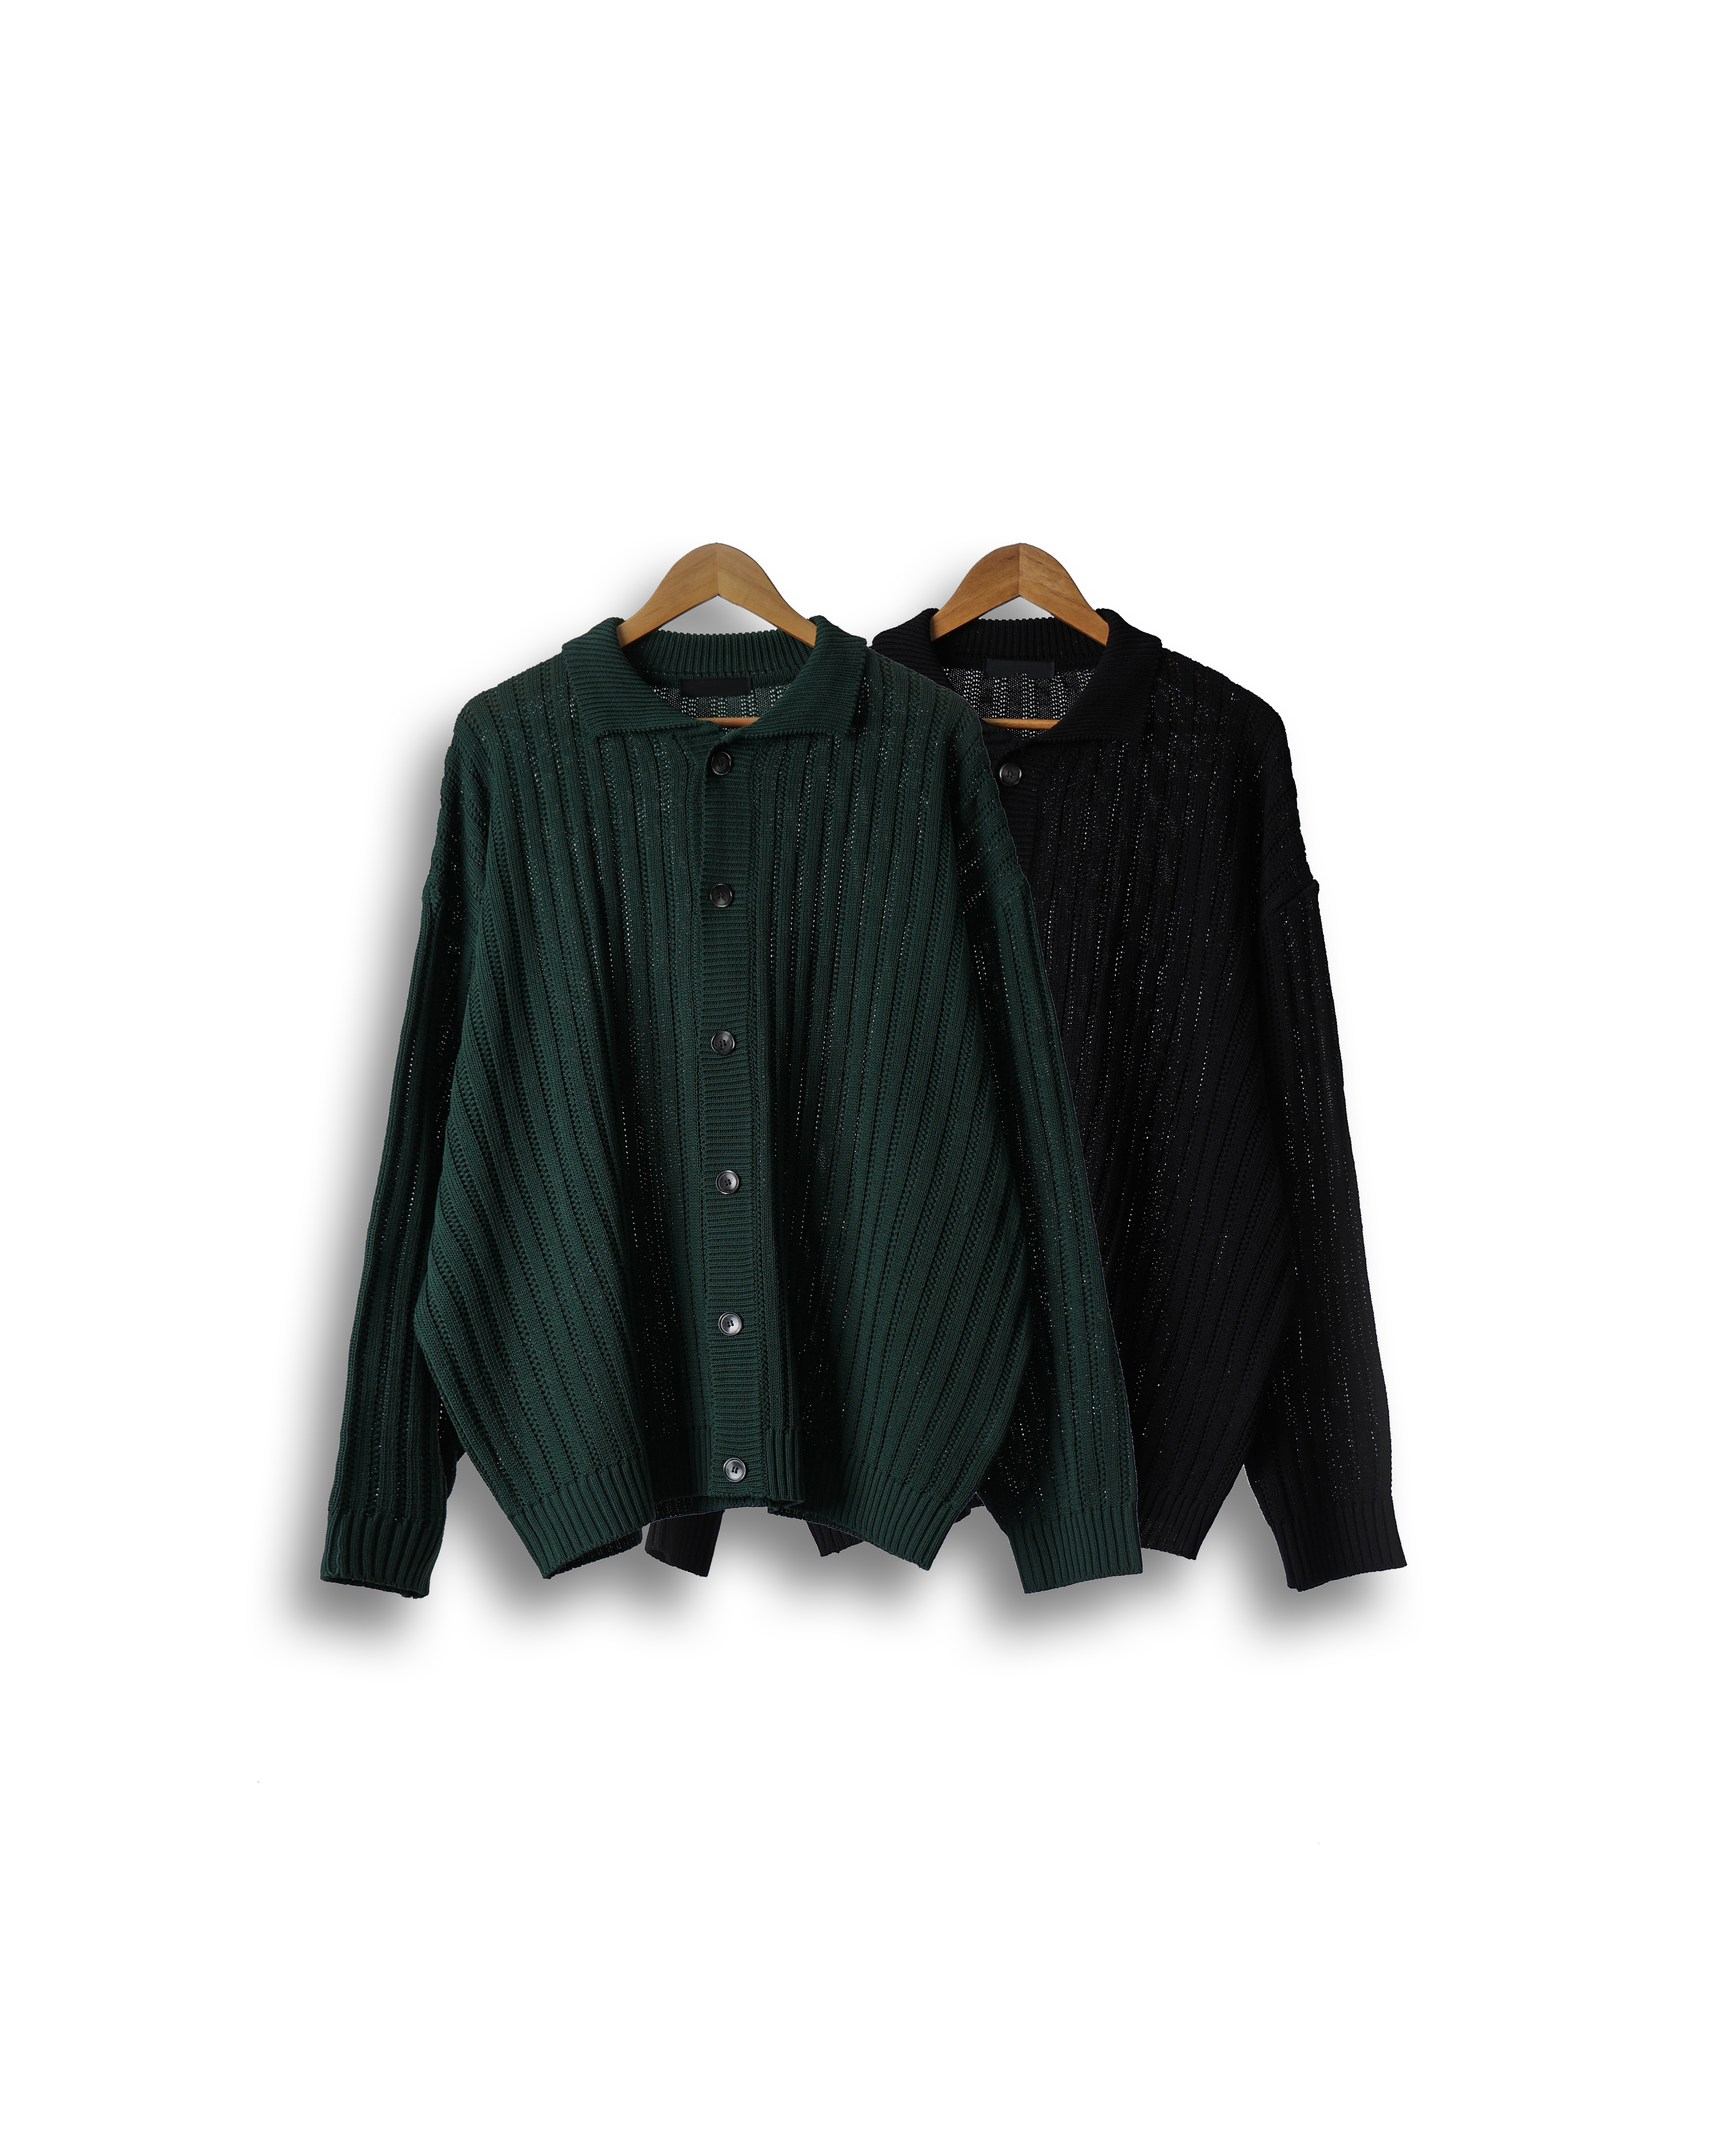 OTHER Loose Knitted Collar Cardigan (Black/Green)